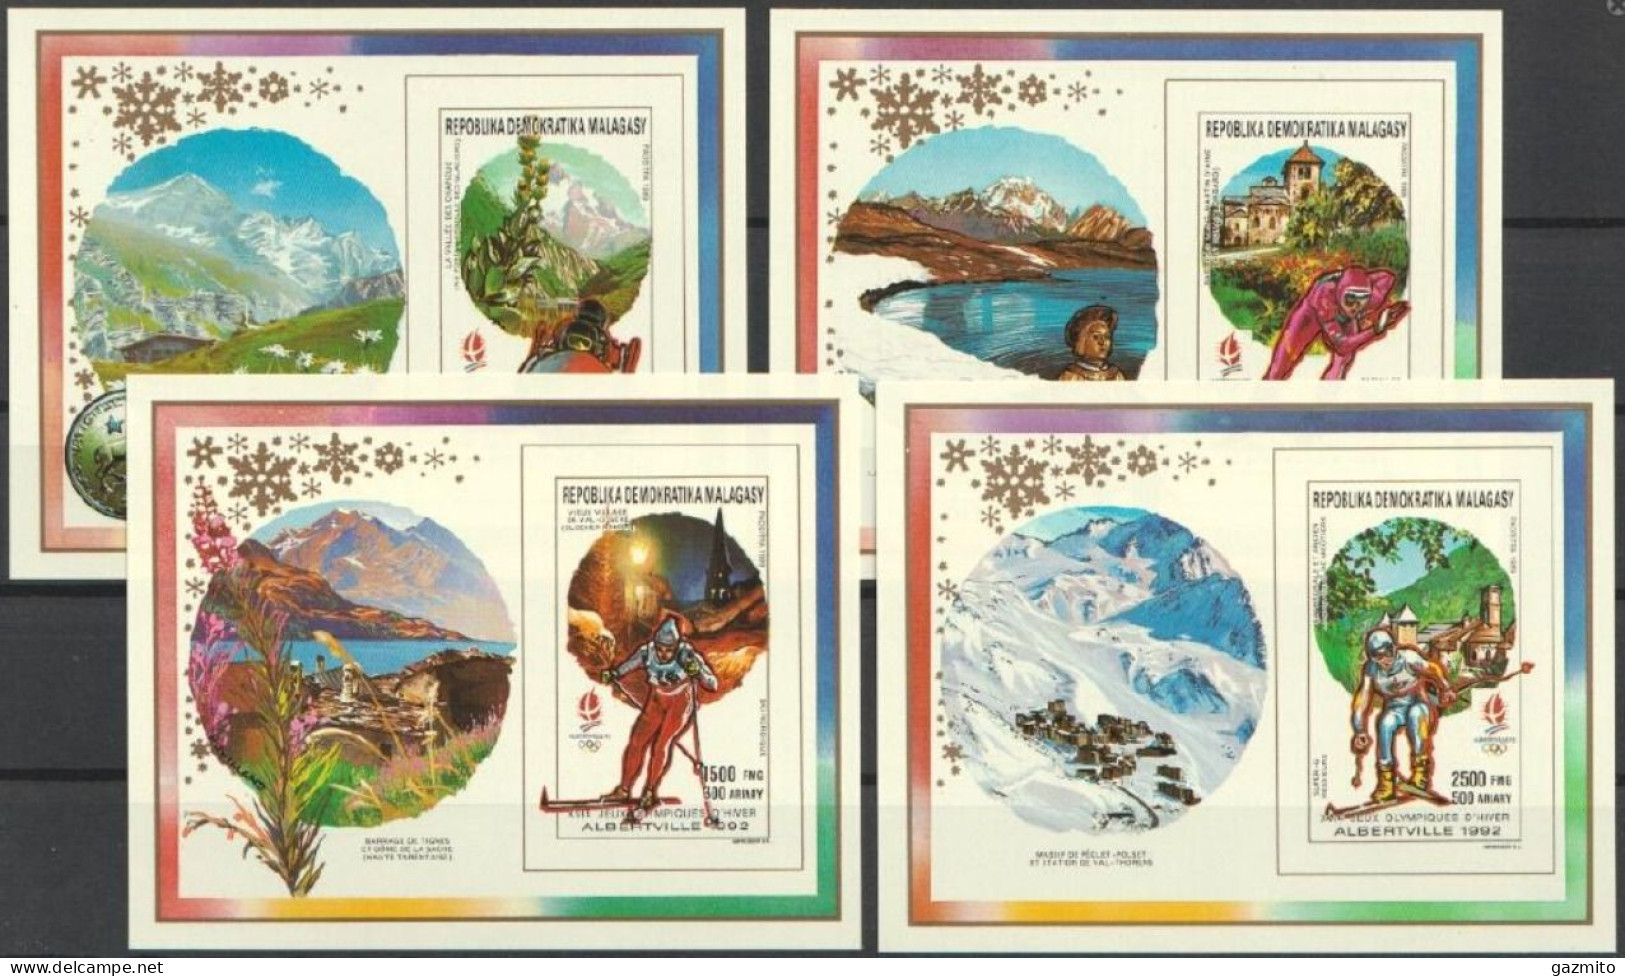 Madagascar 1990, Olympic Games In Albertville, Skiing, 4BF IMPERFORATED - Hiver 1992: Albertville